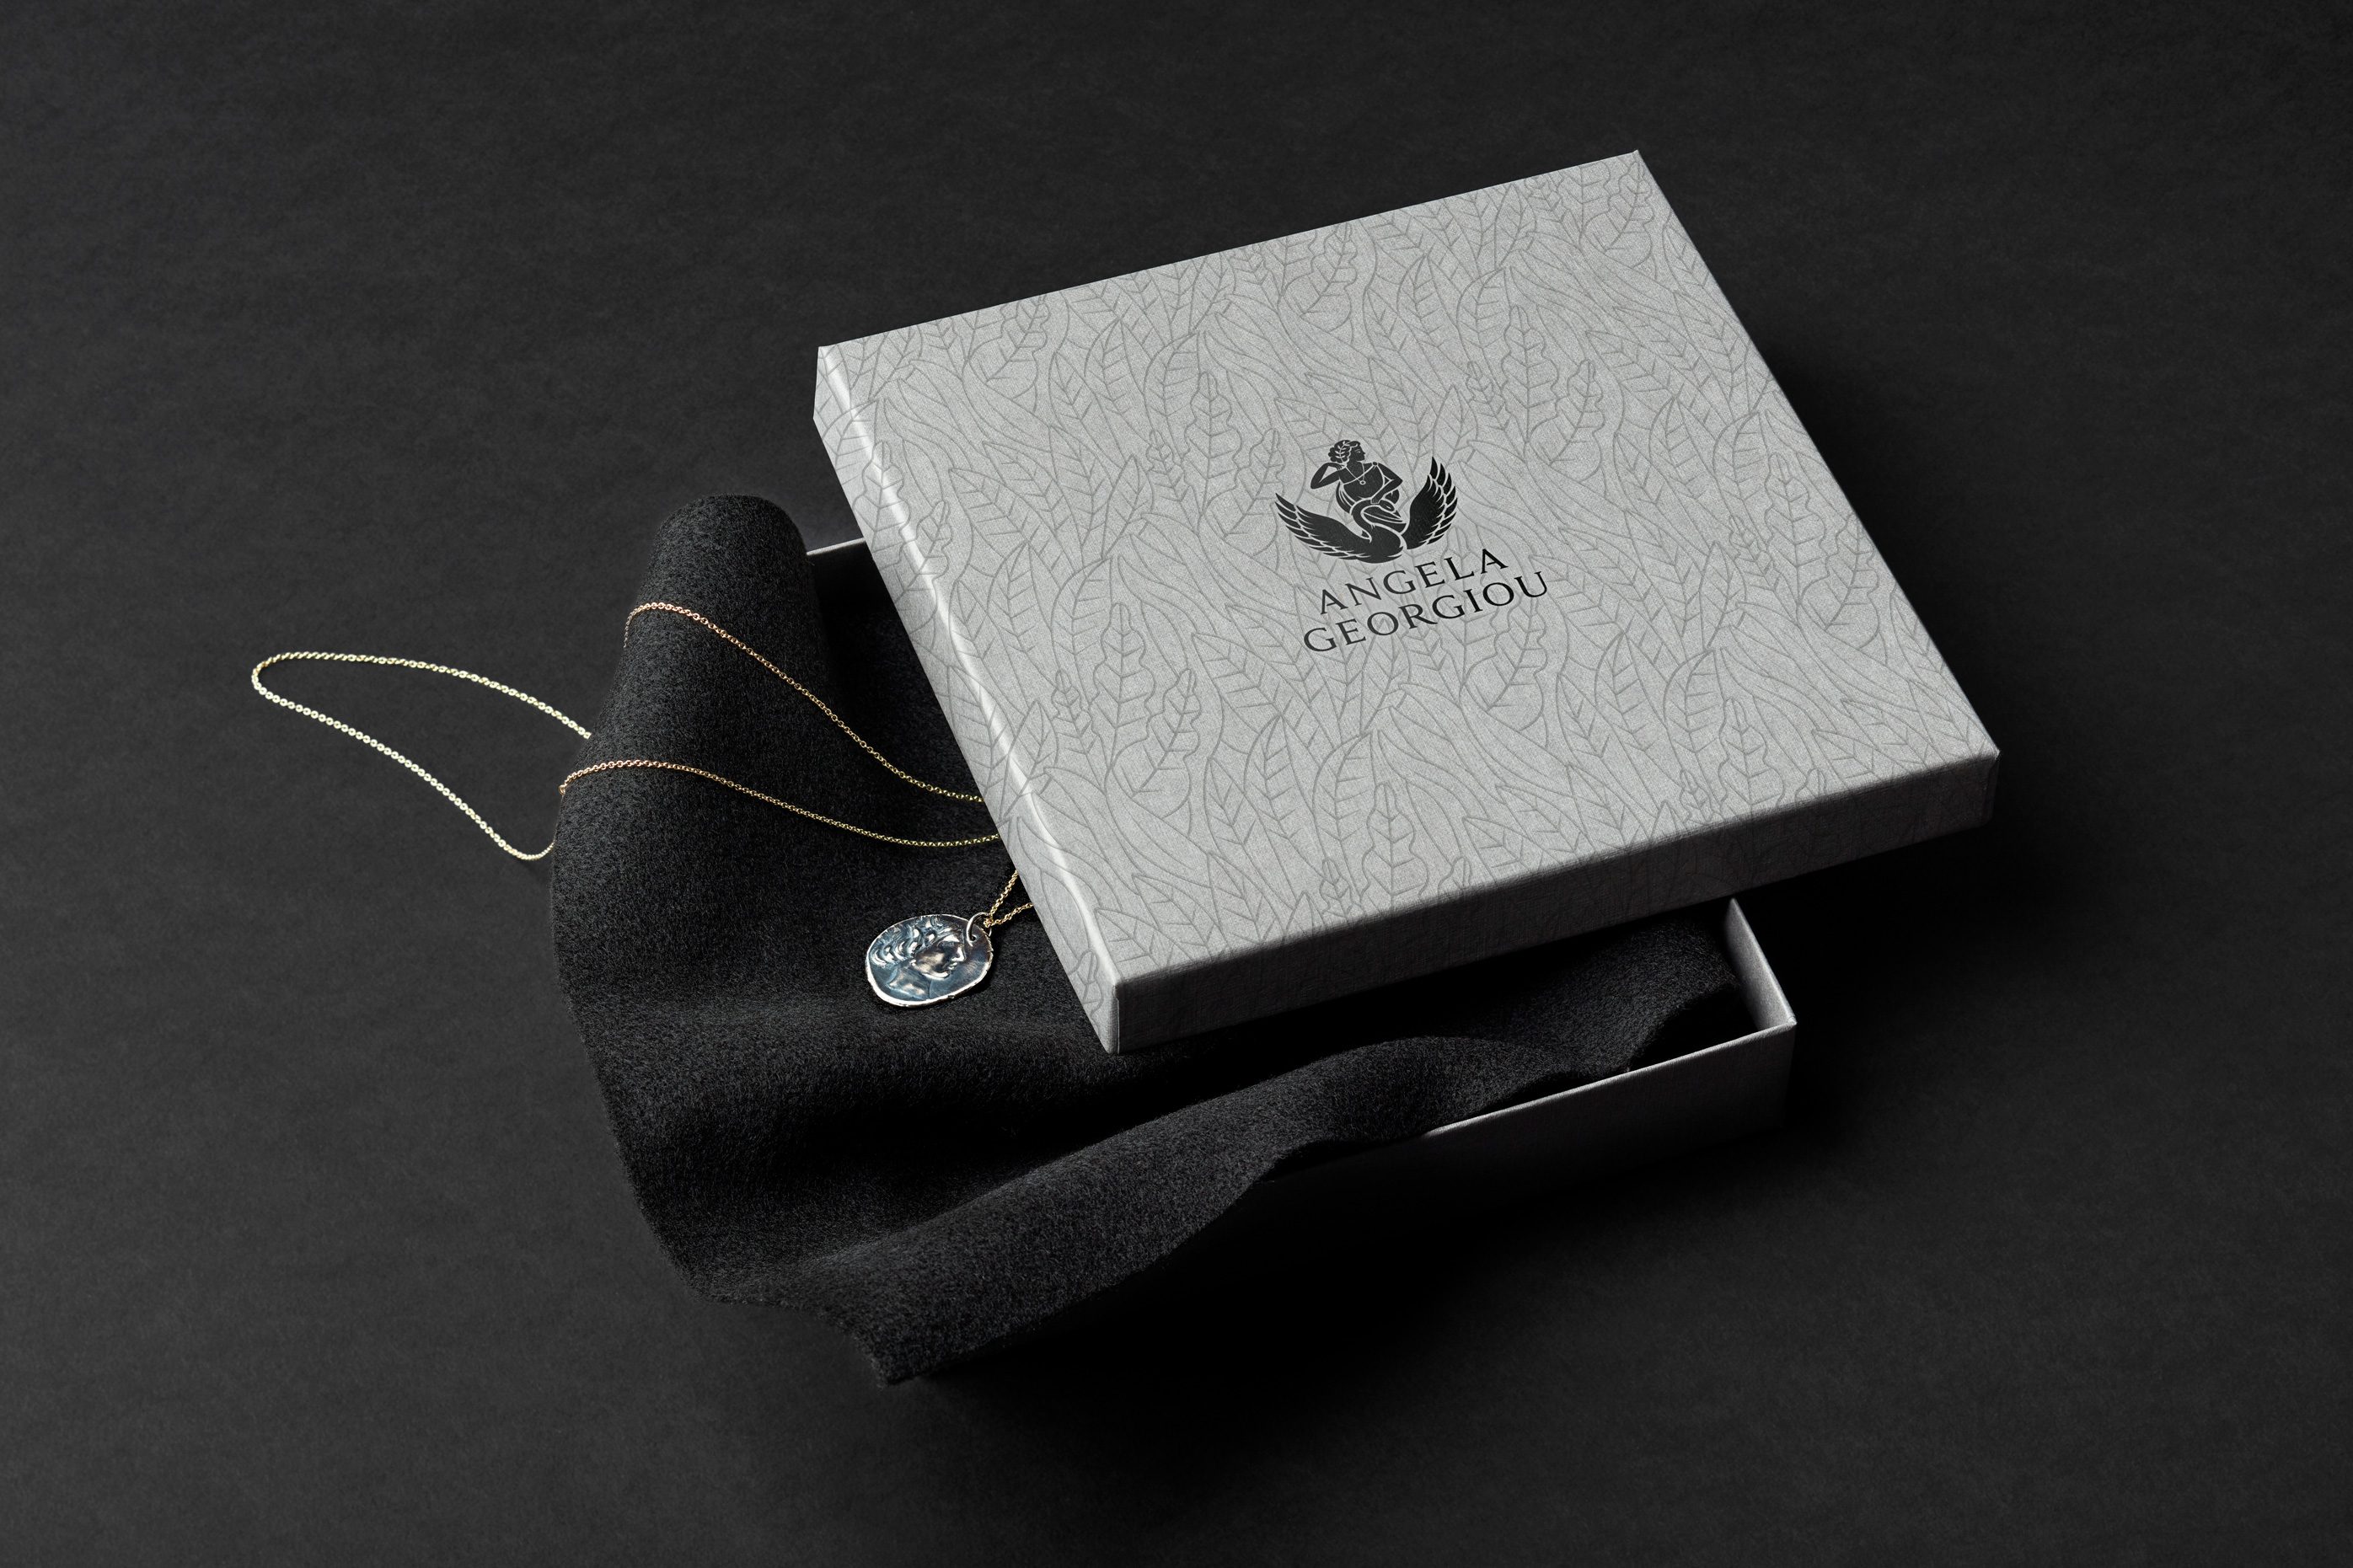 Open branded jewellery box against a dark background showing detailed design and logo to front lid